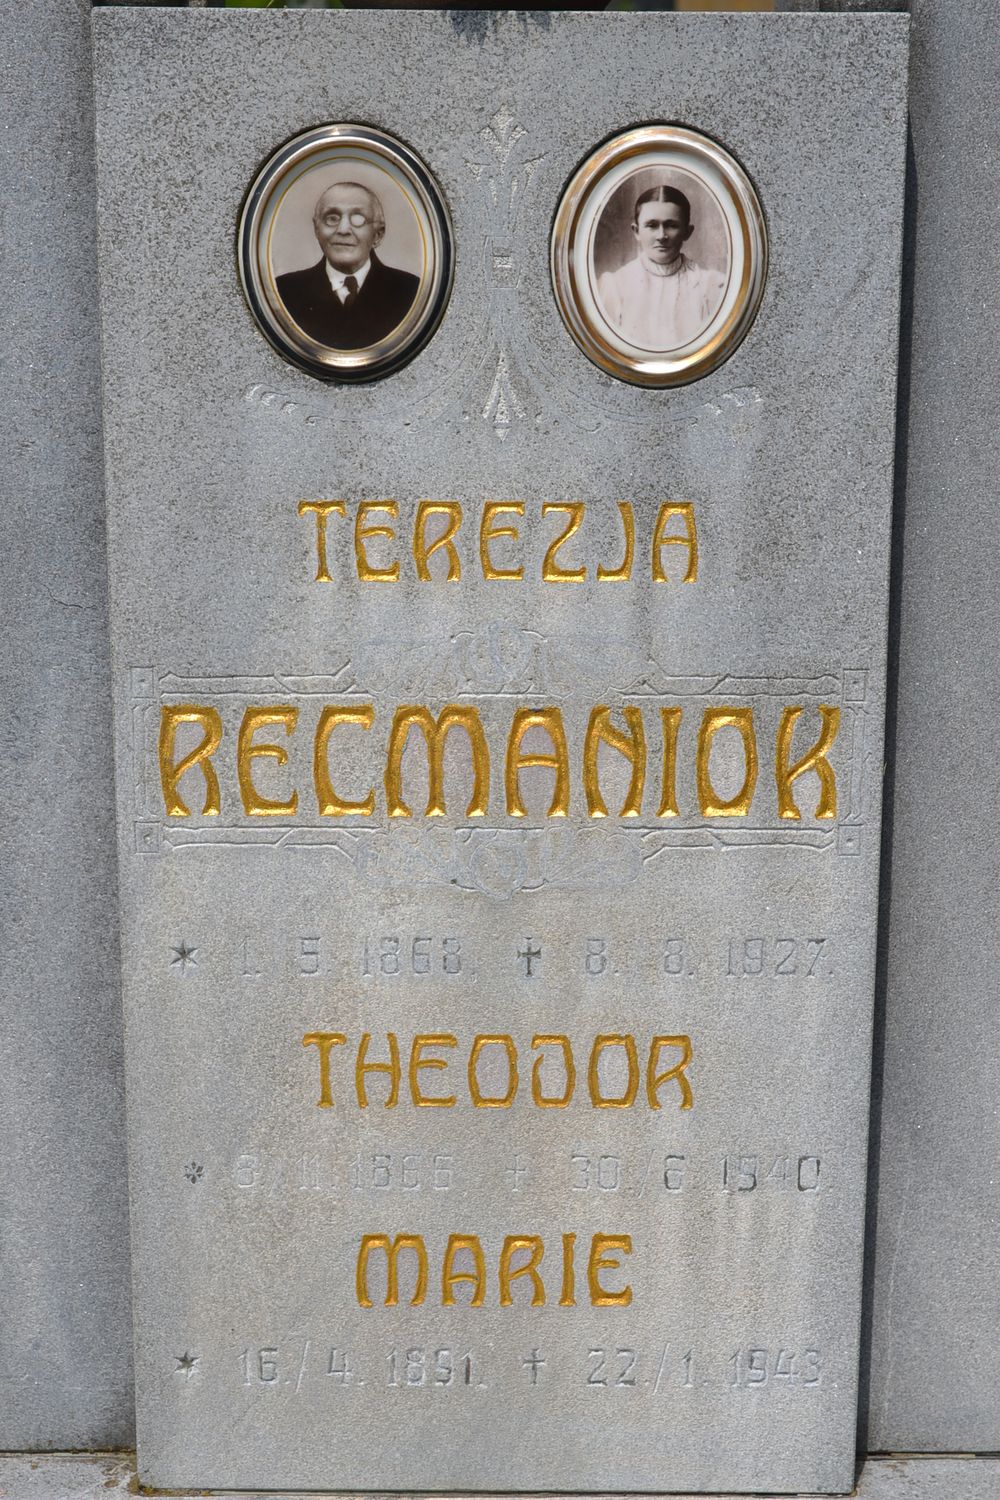 Inscription plaque from the tomb of the Recmaniok and Miczek families, cemetery in Karviná Doły, Czech Republic, as of 2022